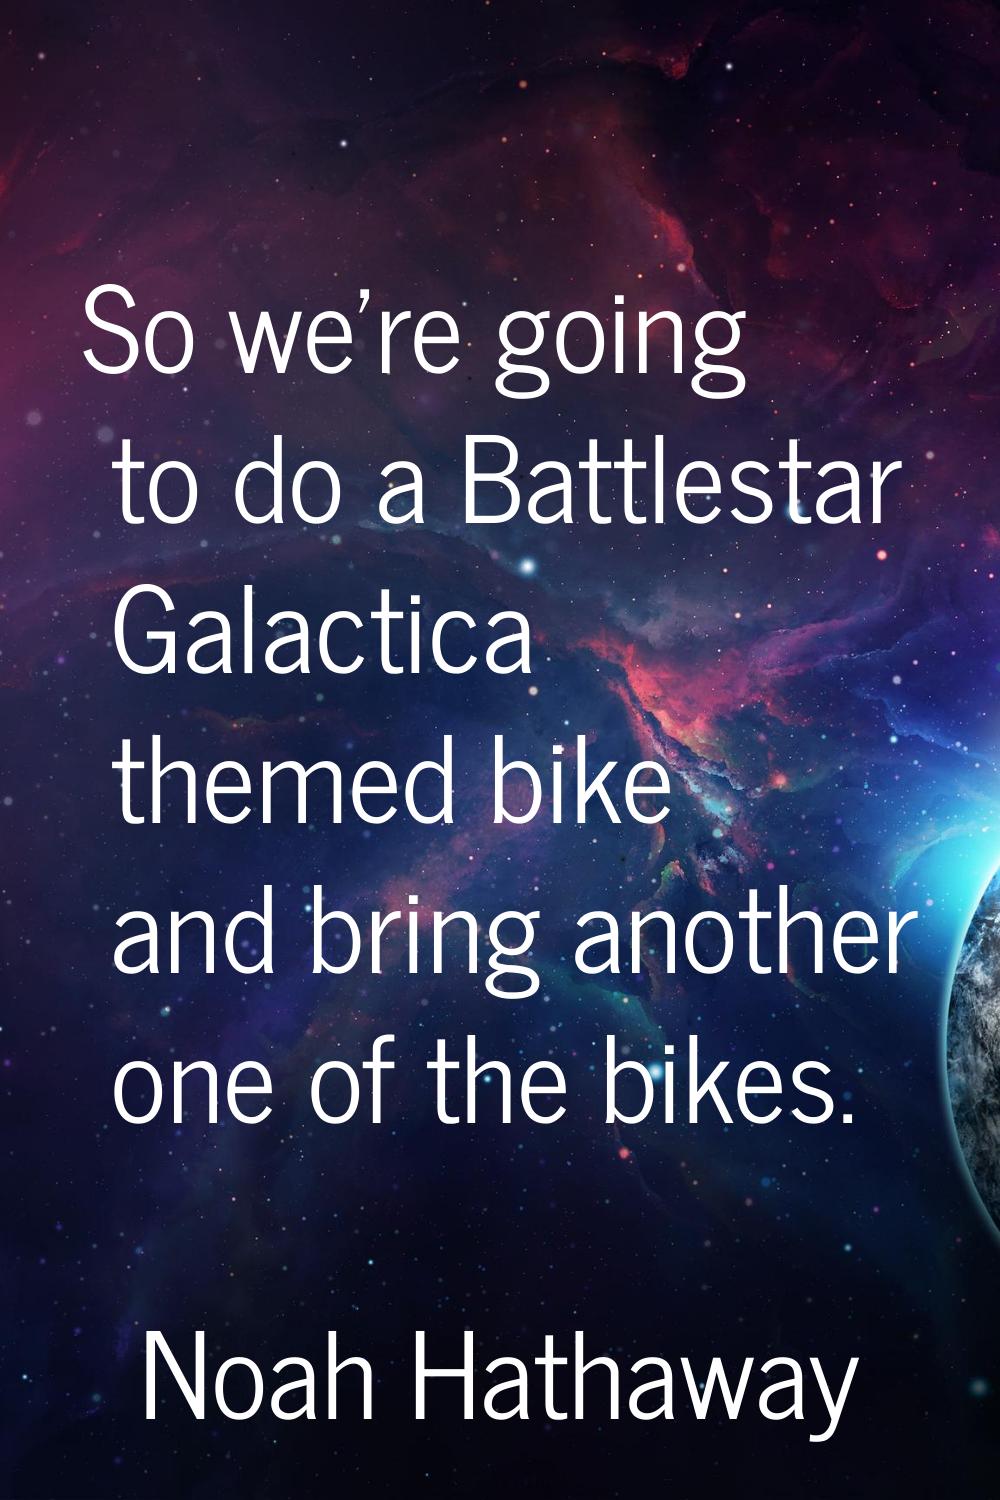 So we're going to do a Battlestar Galactica themed bike and bring another one of the bikes.